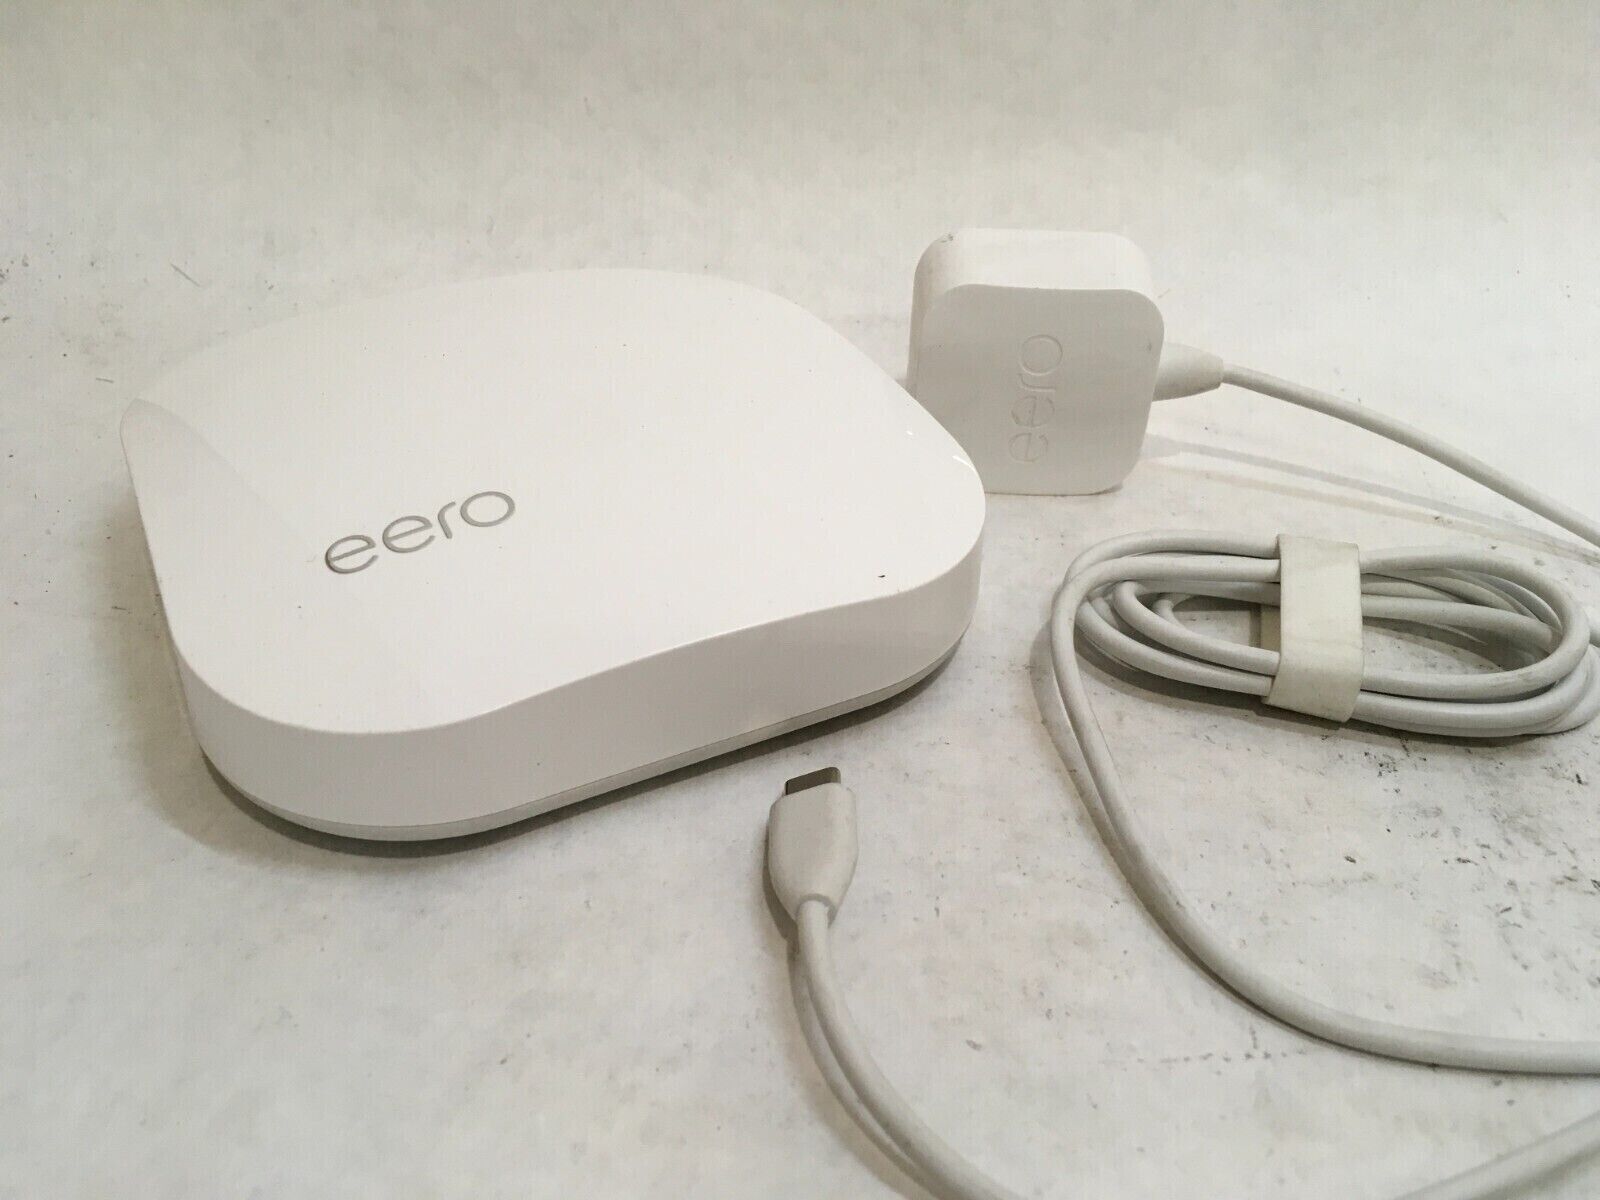 Lot of 3 Eero Pro B010001 2nd Generation Gen AC Tri-Band Mesh Router White